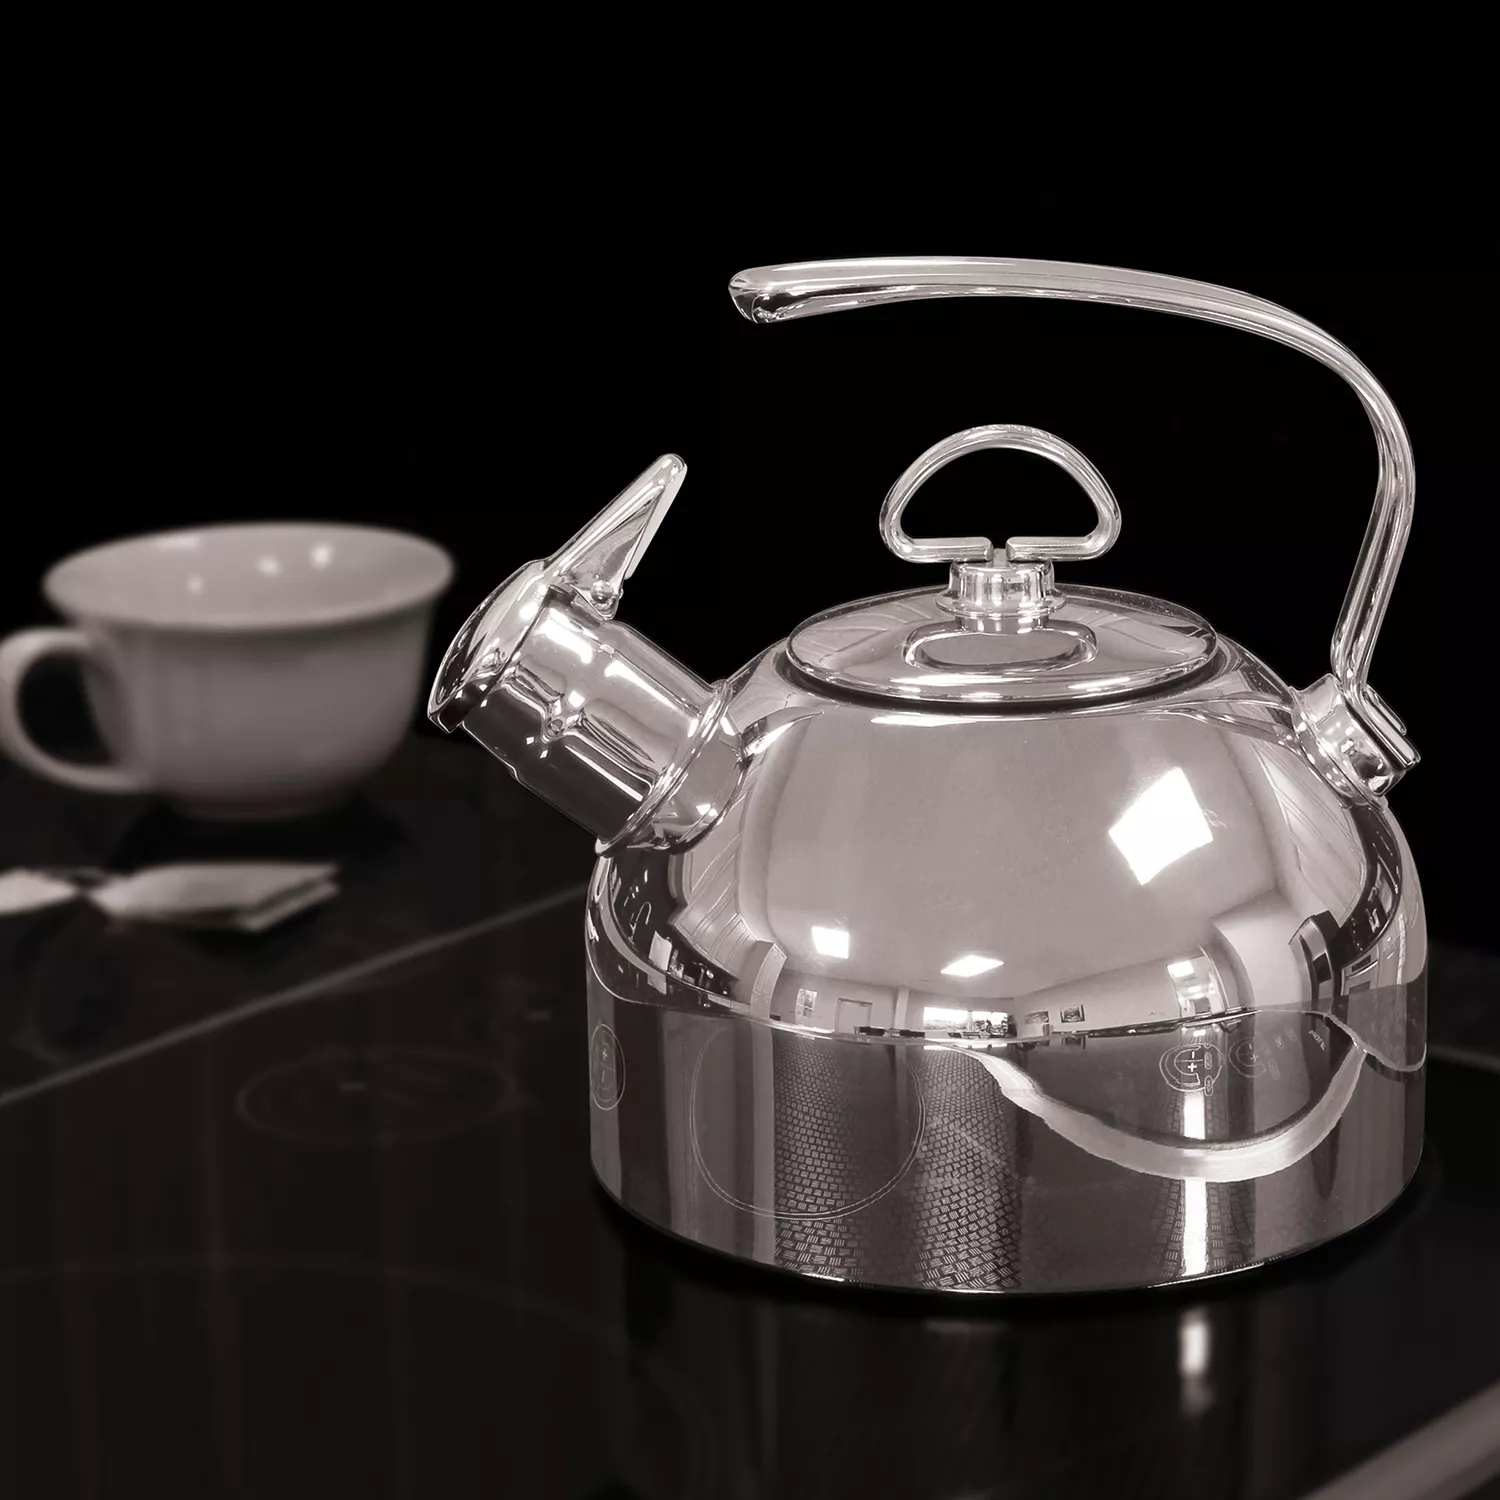 Kitchen Details 3.4-Quart Stainless Steel Kettle in the Cooking